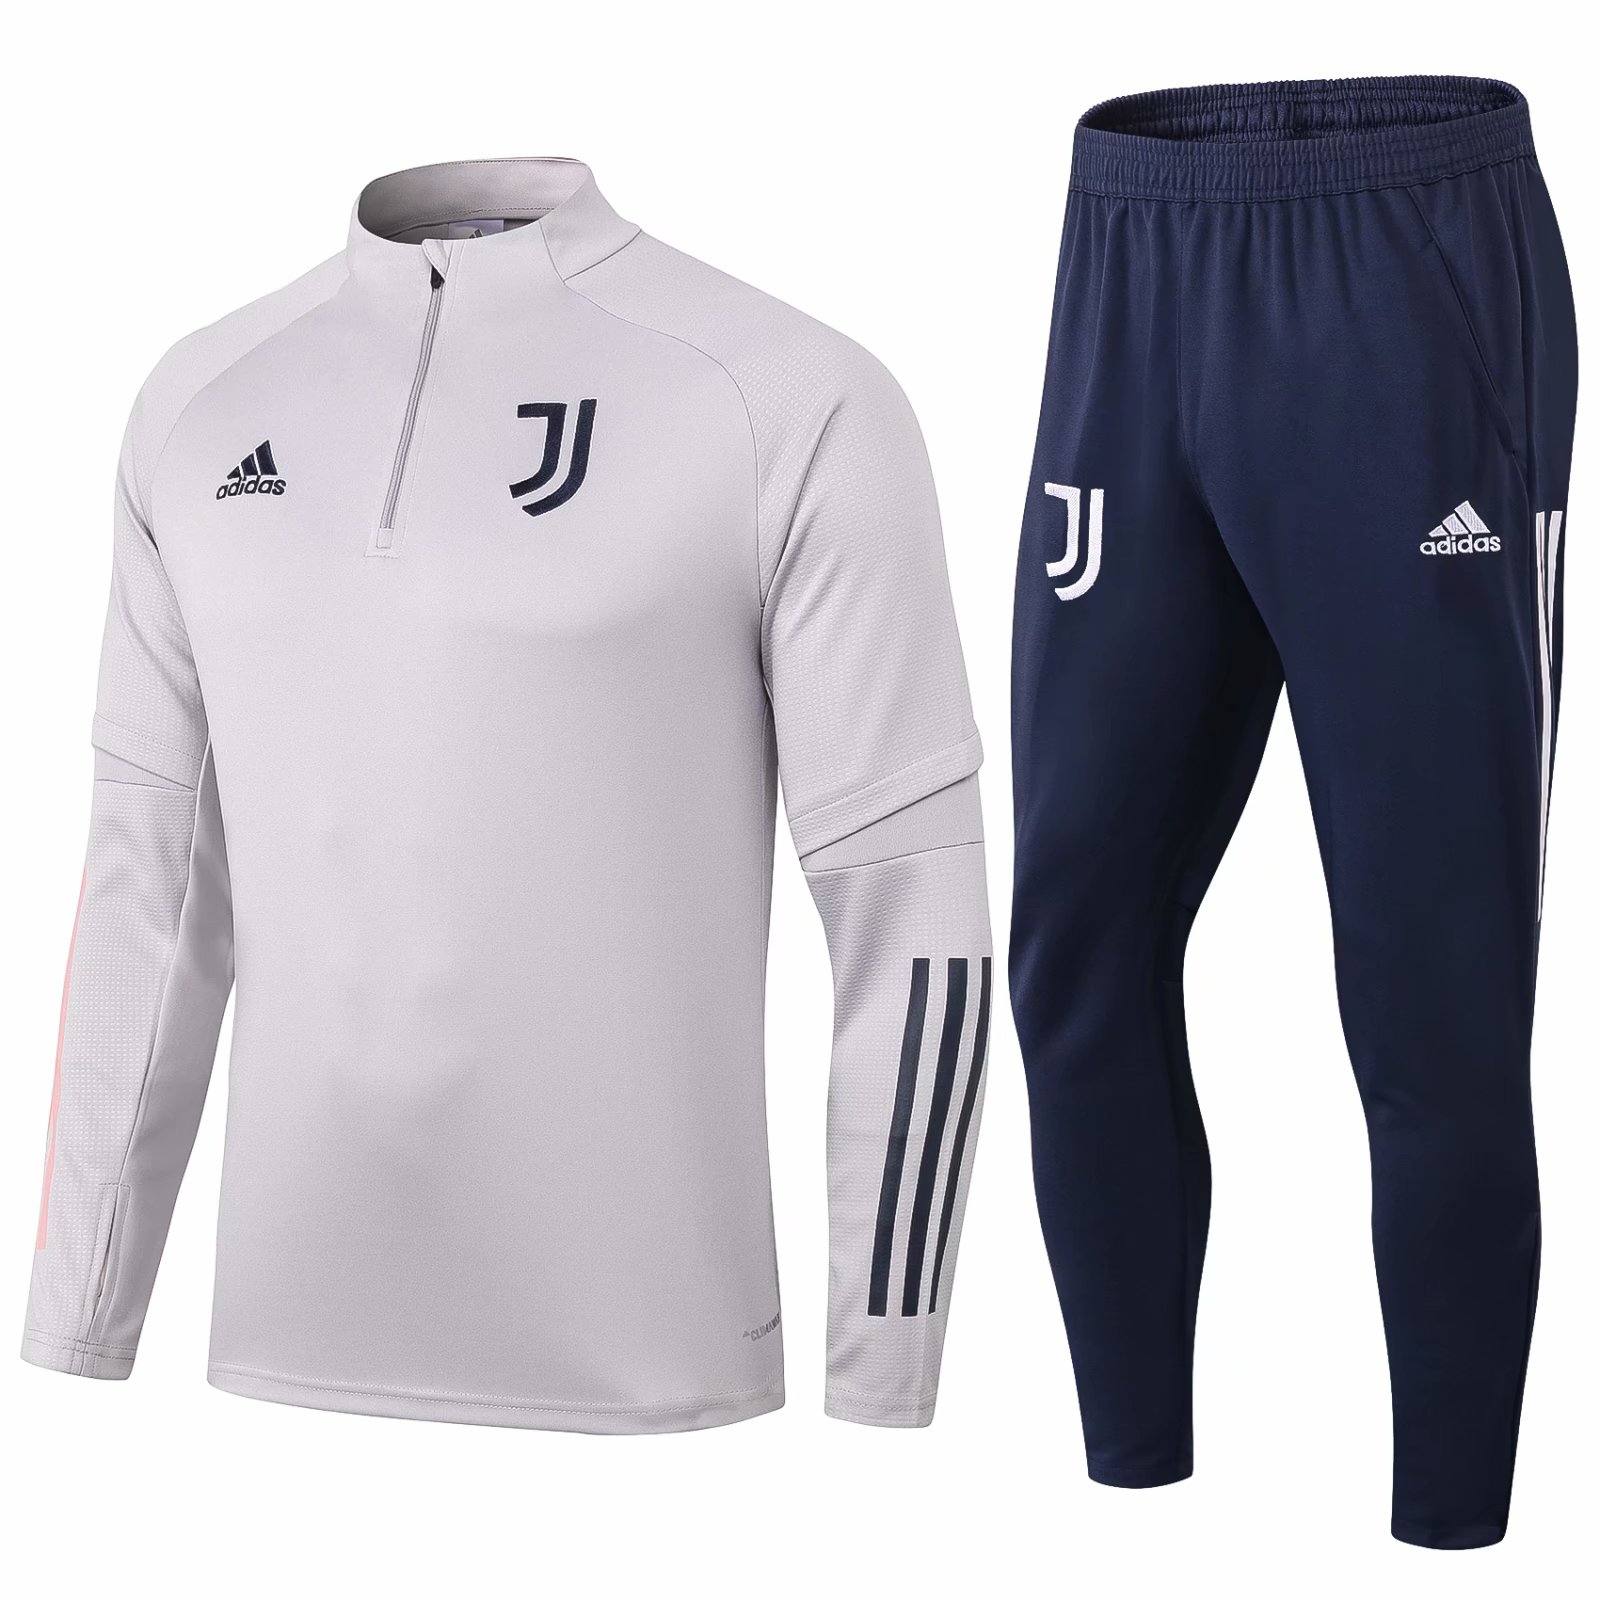 2020-2021 Juventus football training suit for adults